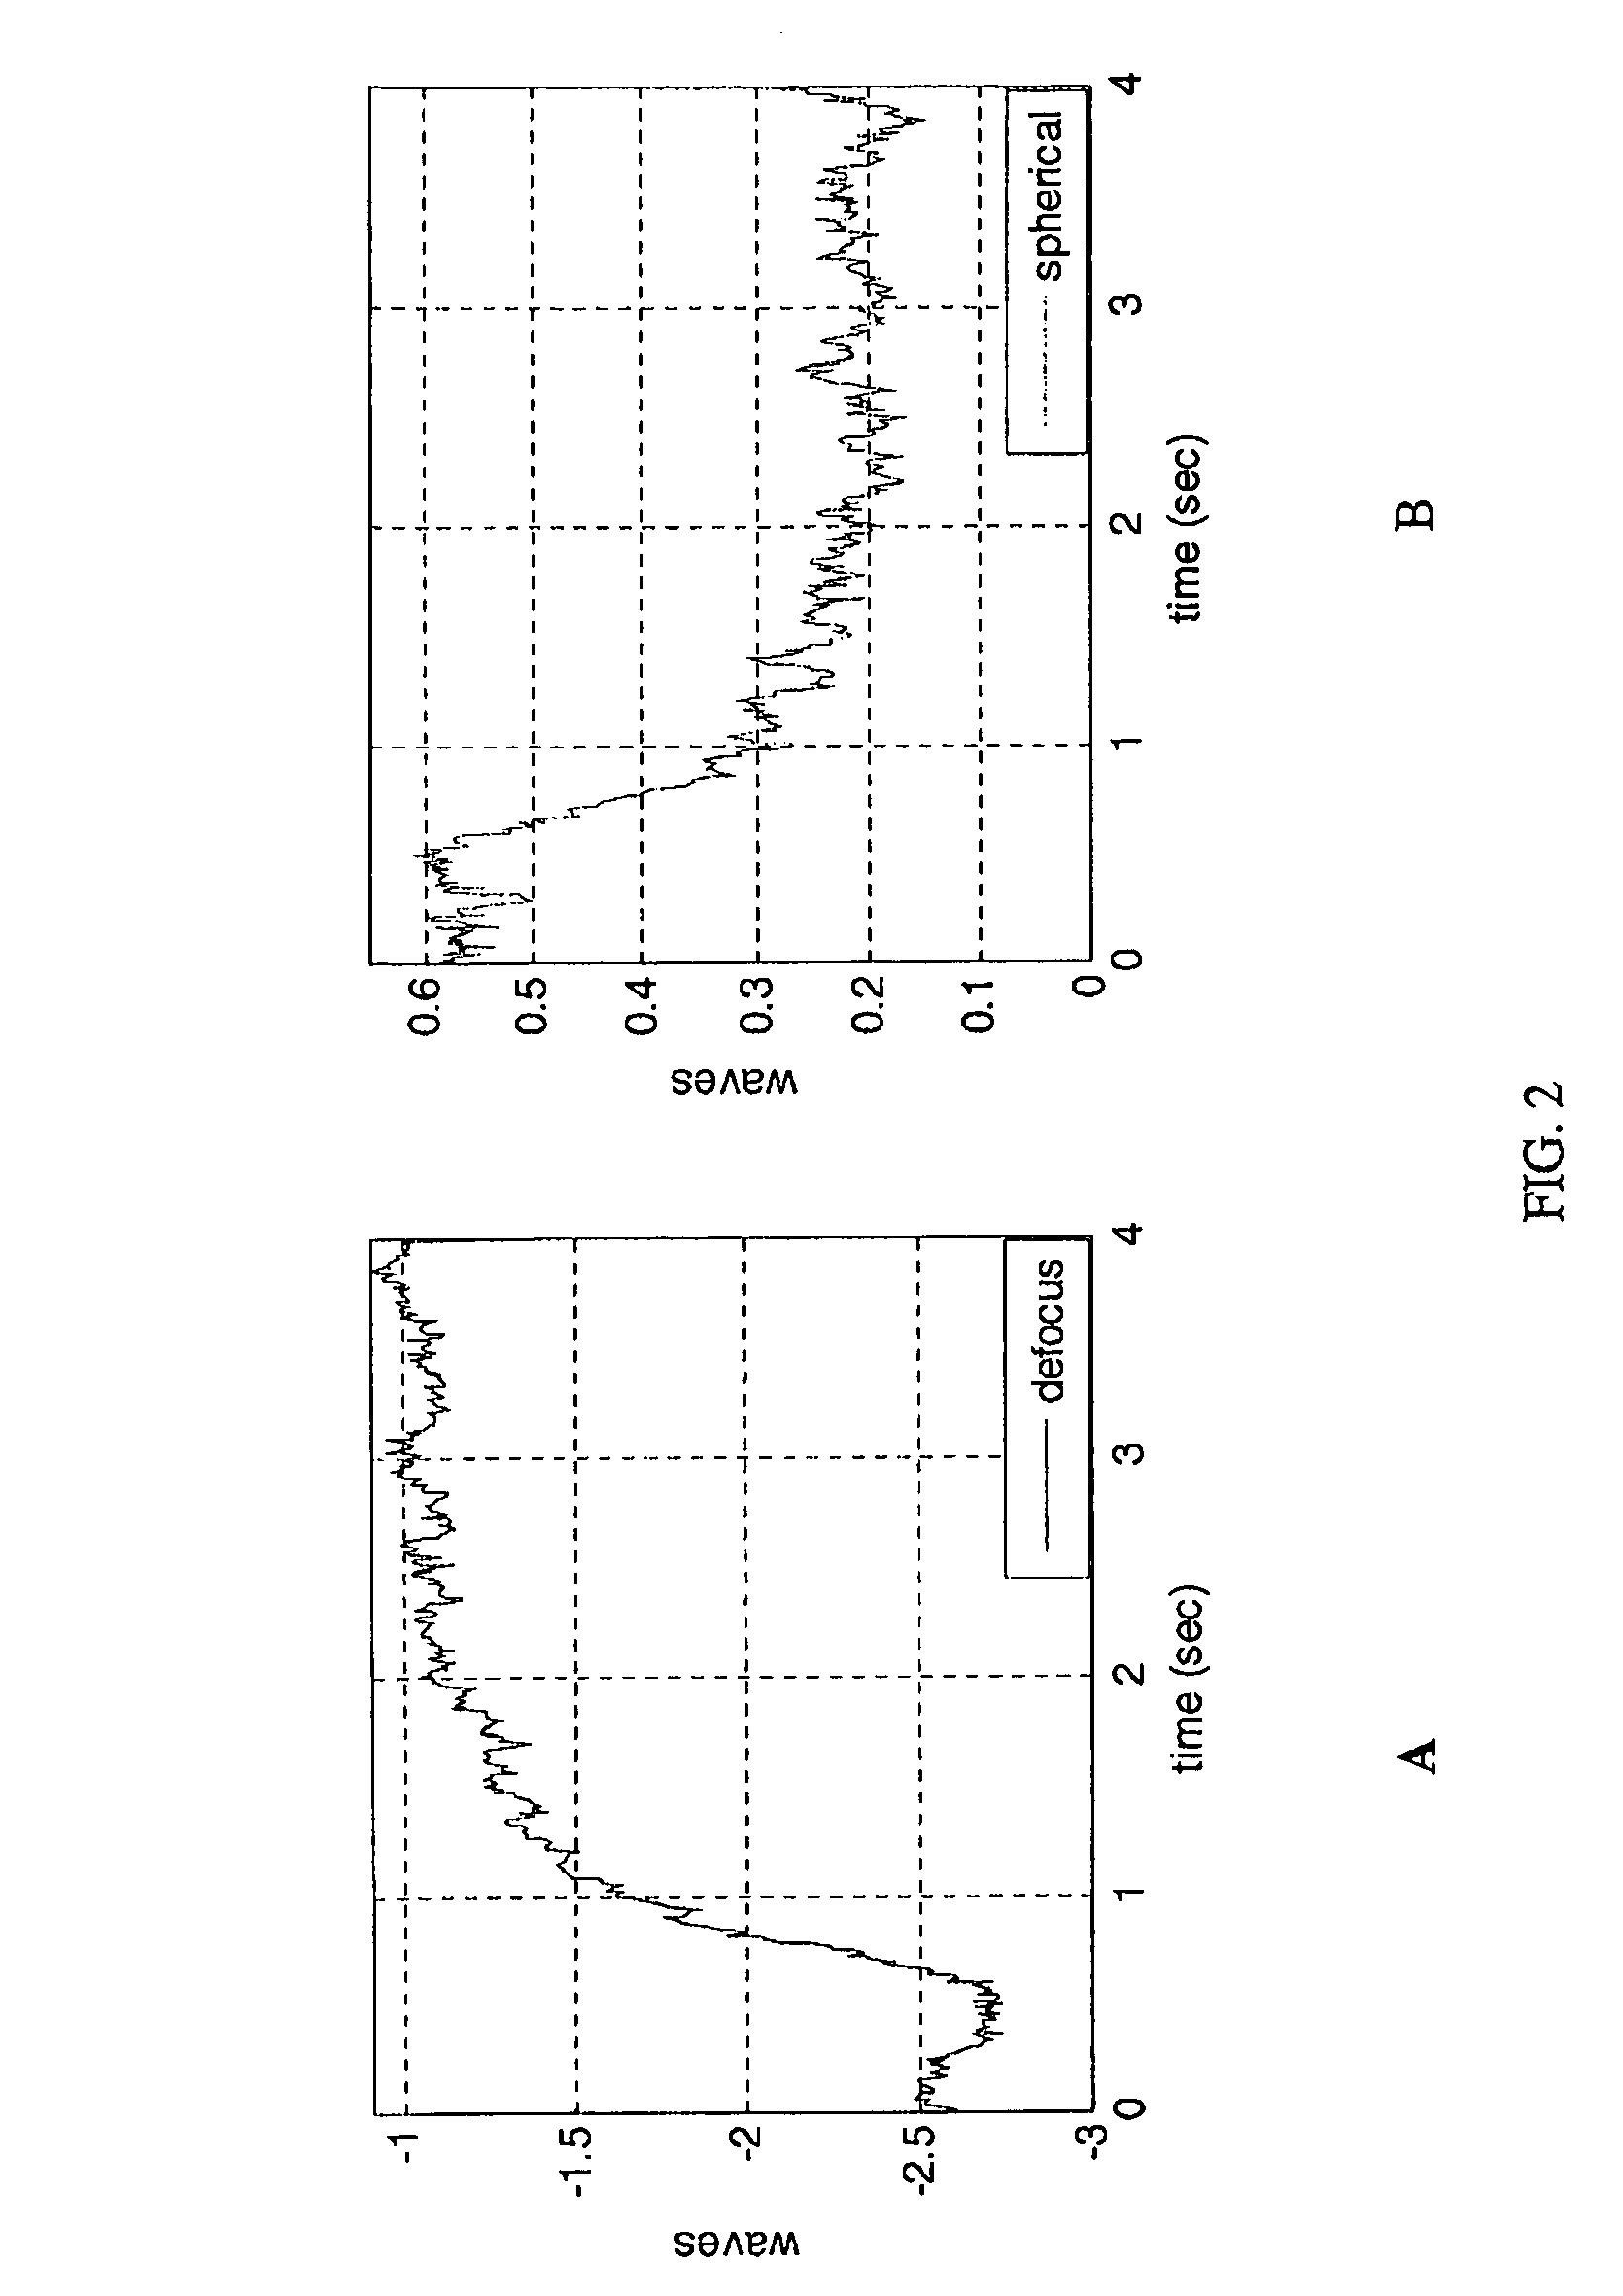 Objective traumatic brain injury assessment system and method